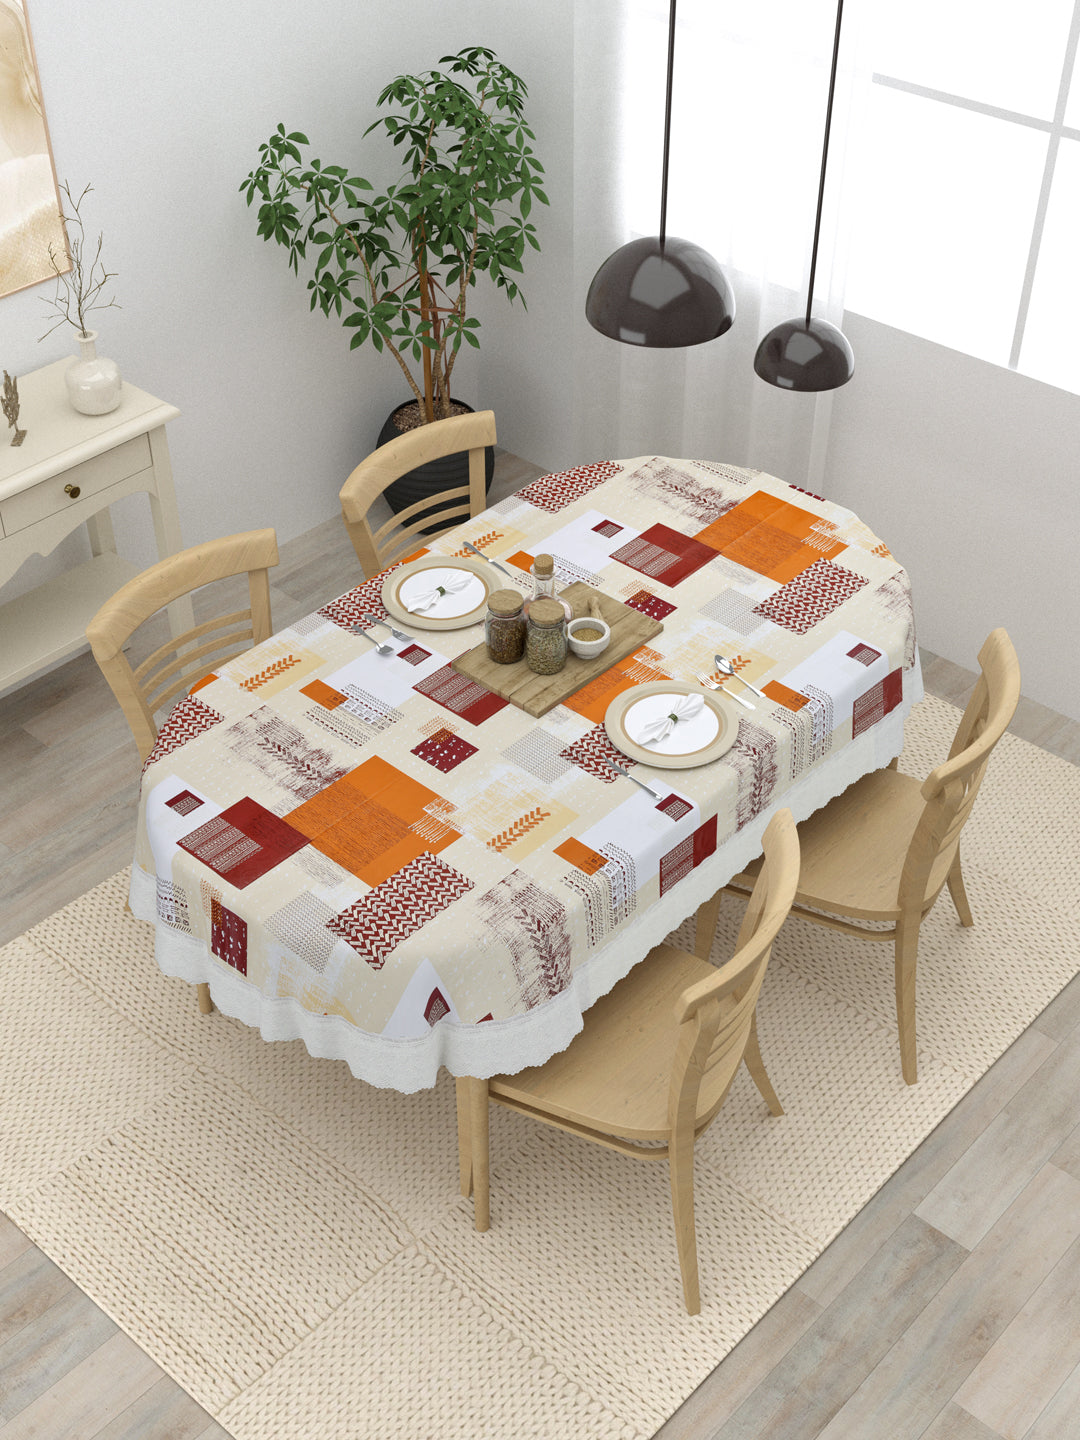 4 Seater Oval Dining Table Cover; 54x78 Inches; Material - PVC; Anti Slip; Orange & Maroon Checks